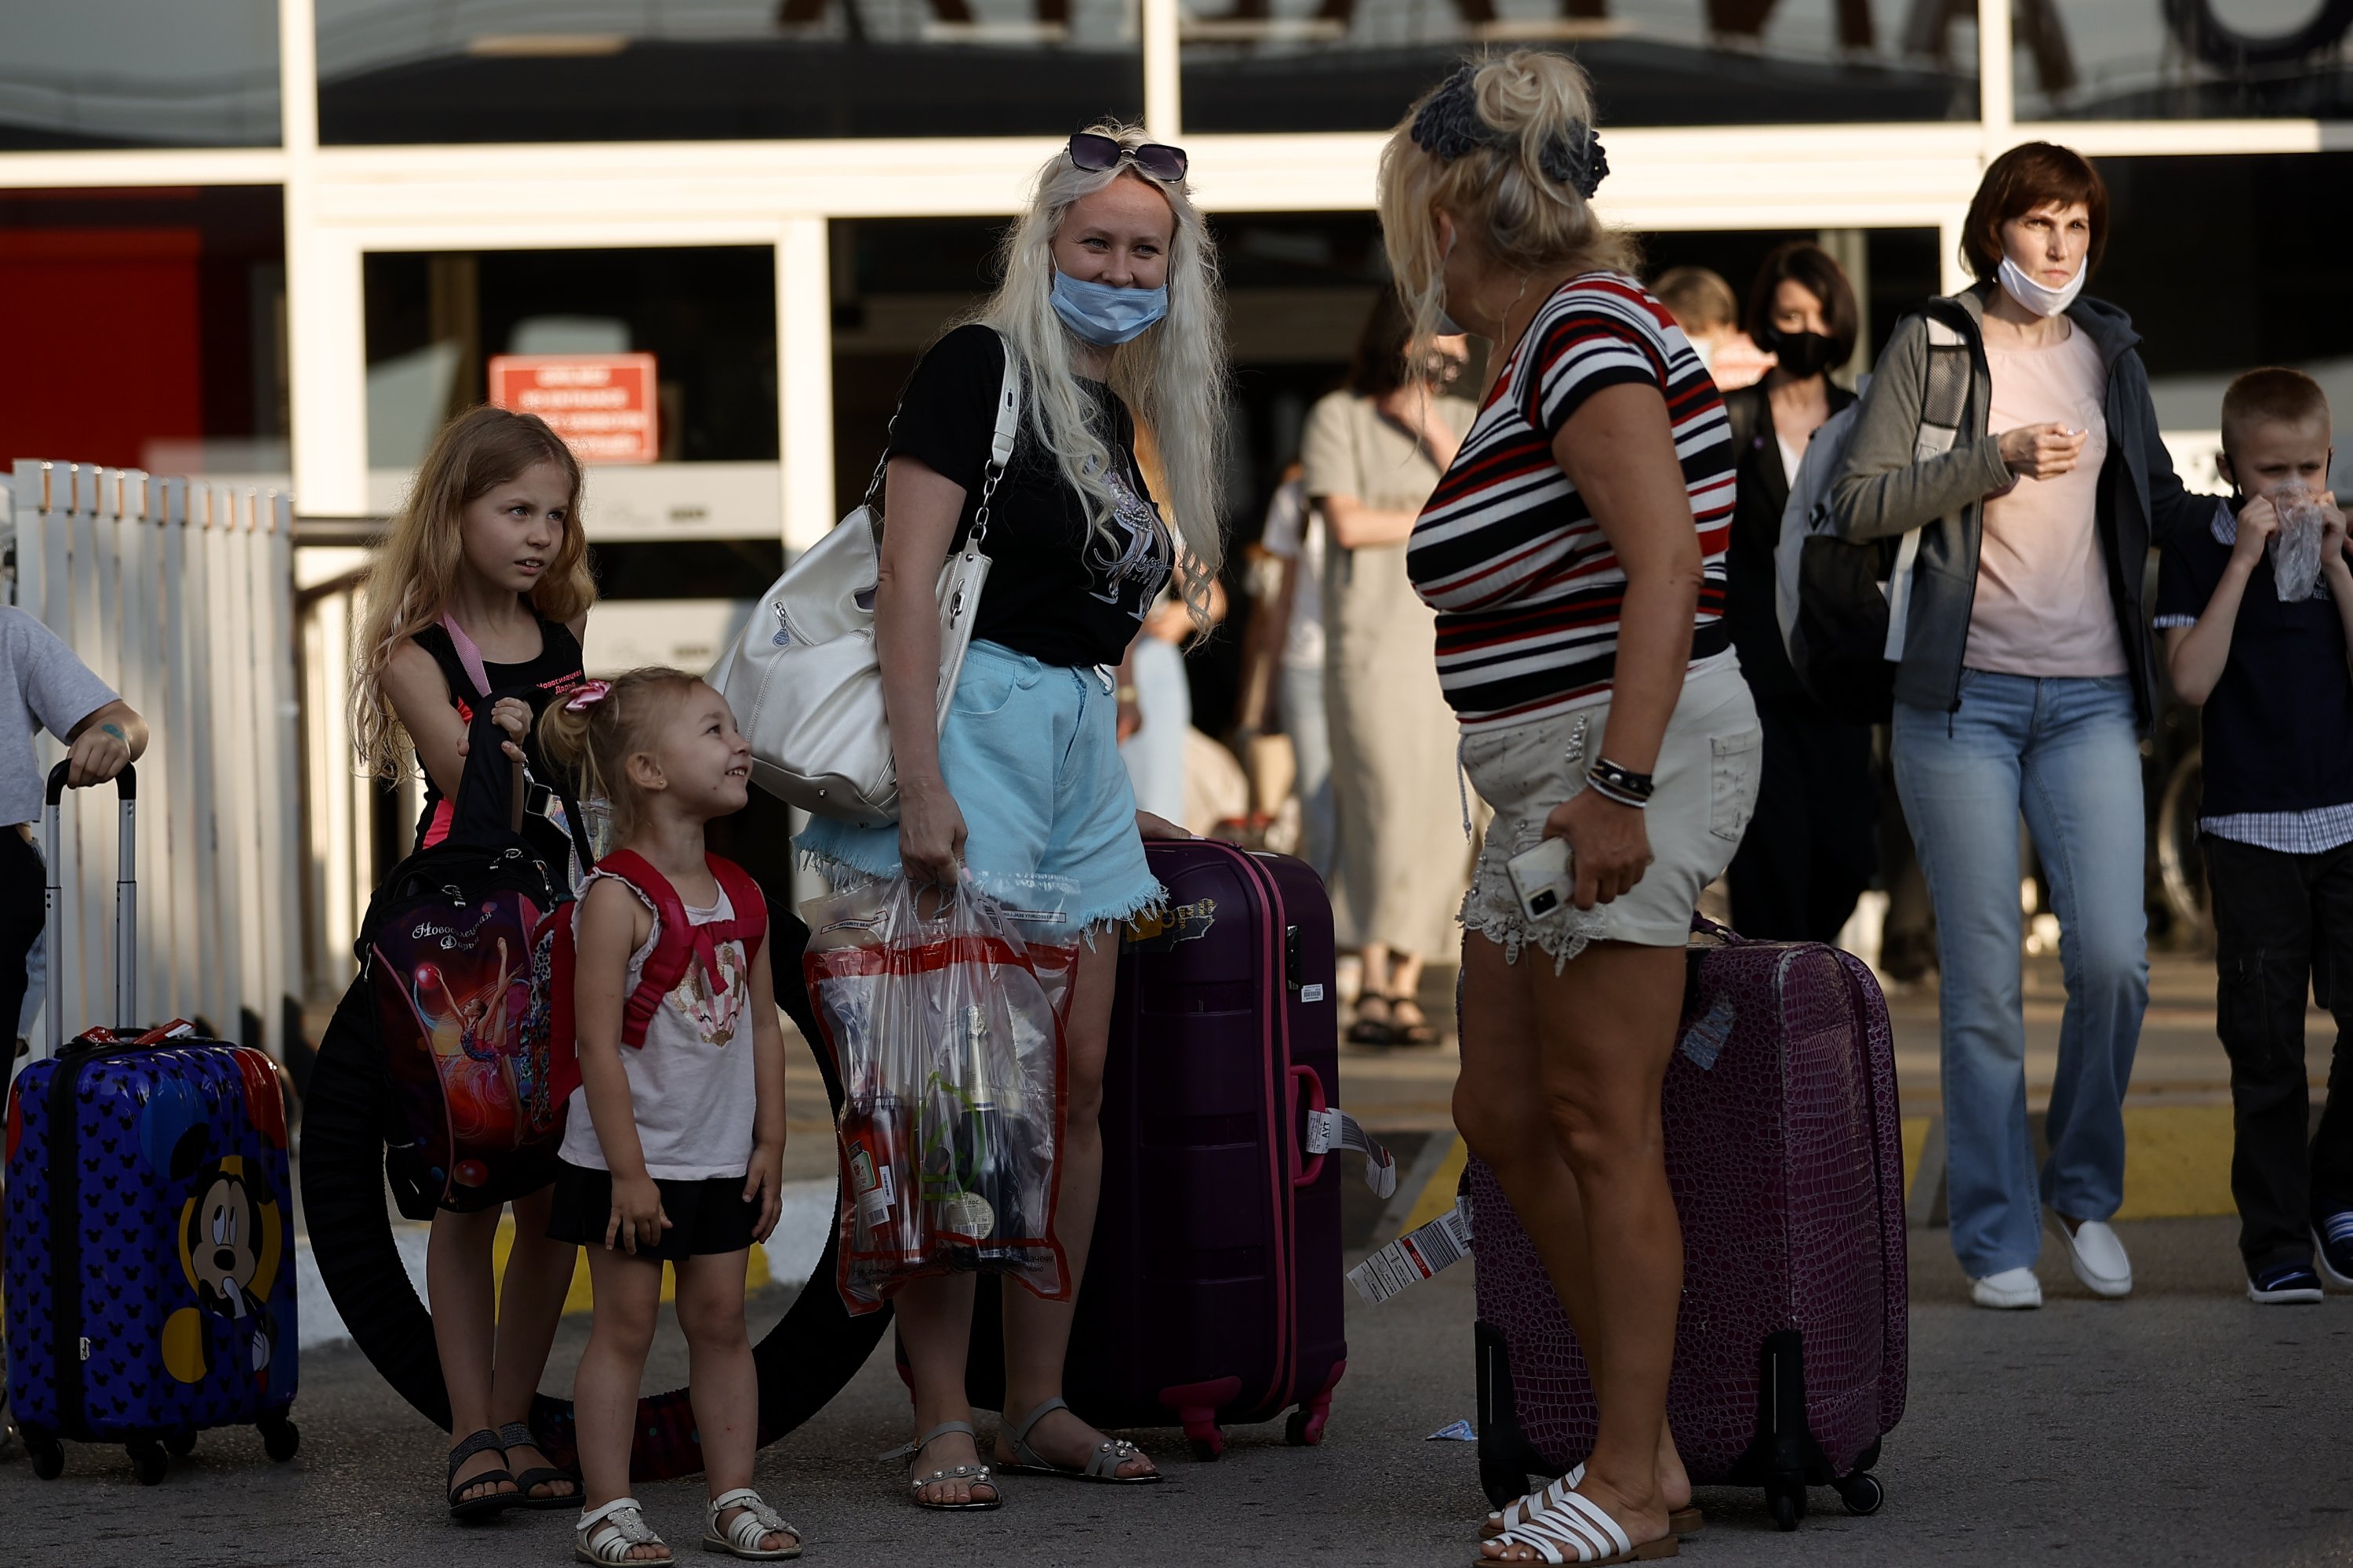 Russian tourists exit the airport as they arrive in the southern province of Antalya, Turkey, June 22, 2021. (AA Photo)